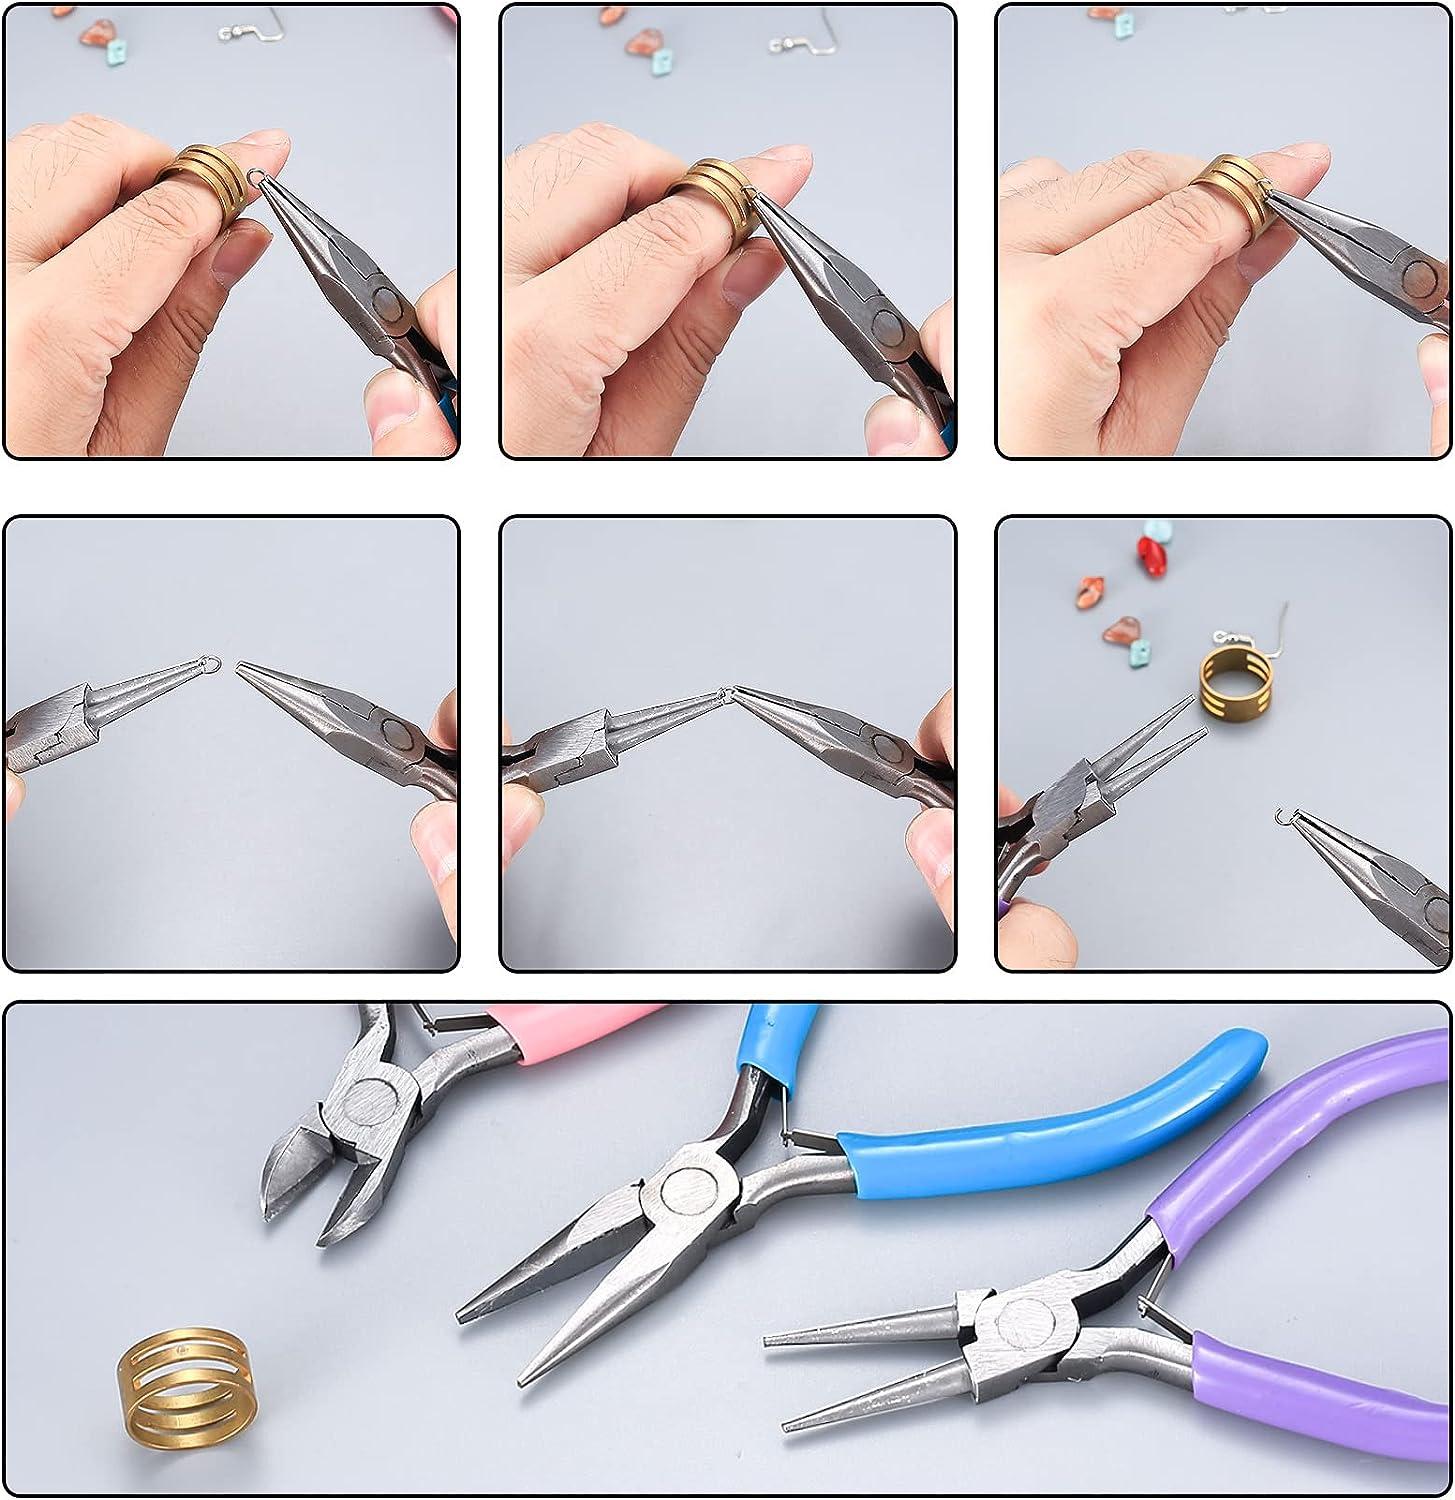 Box Joint Round Nose Pliers - Model Craft Tools USA